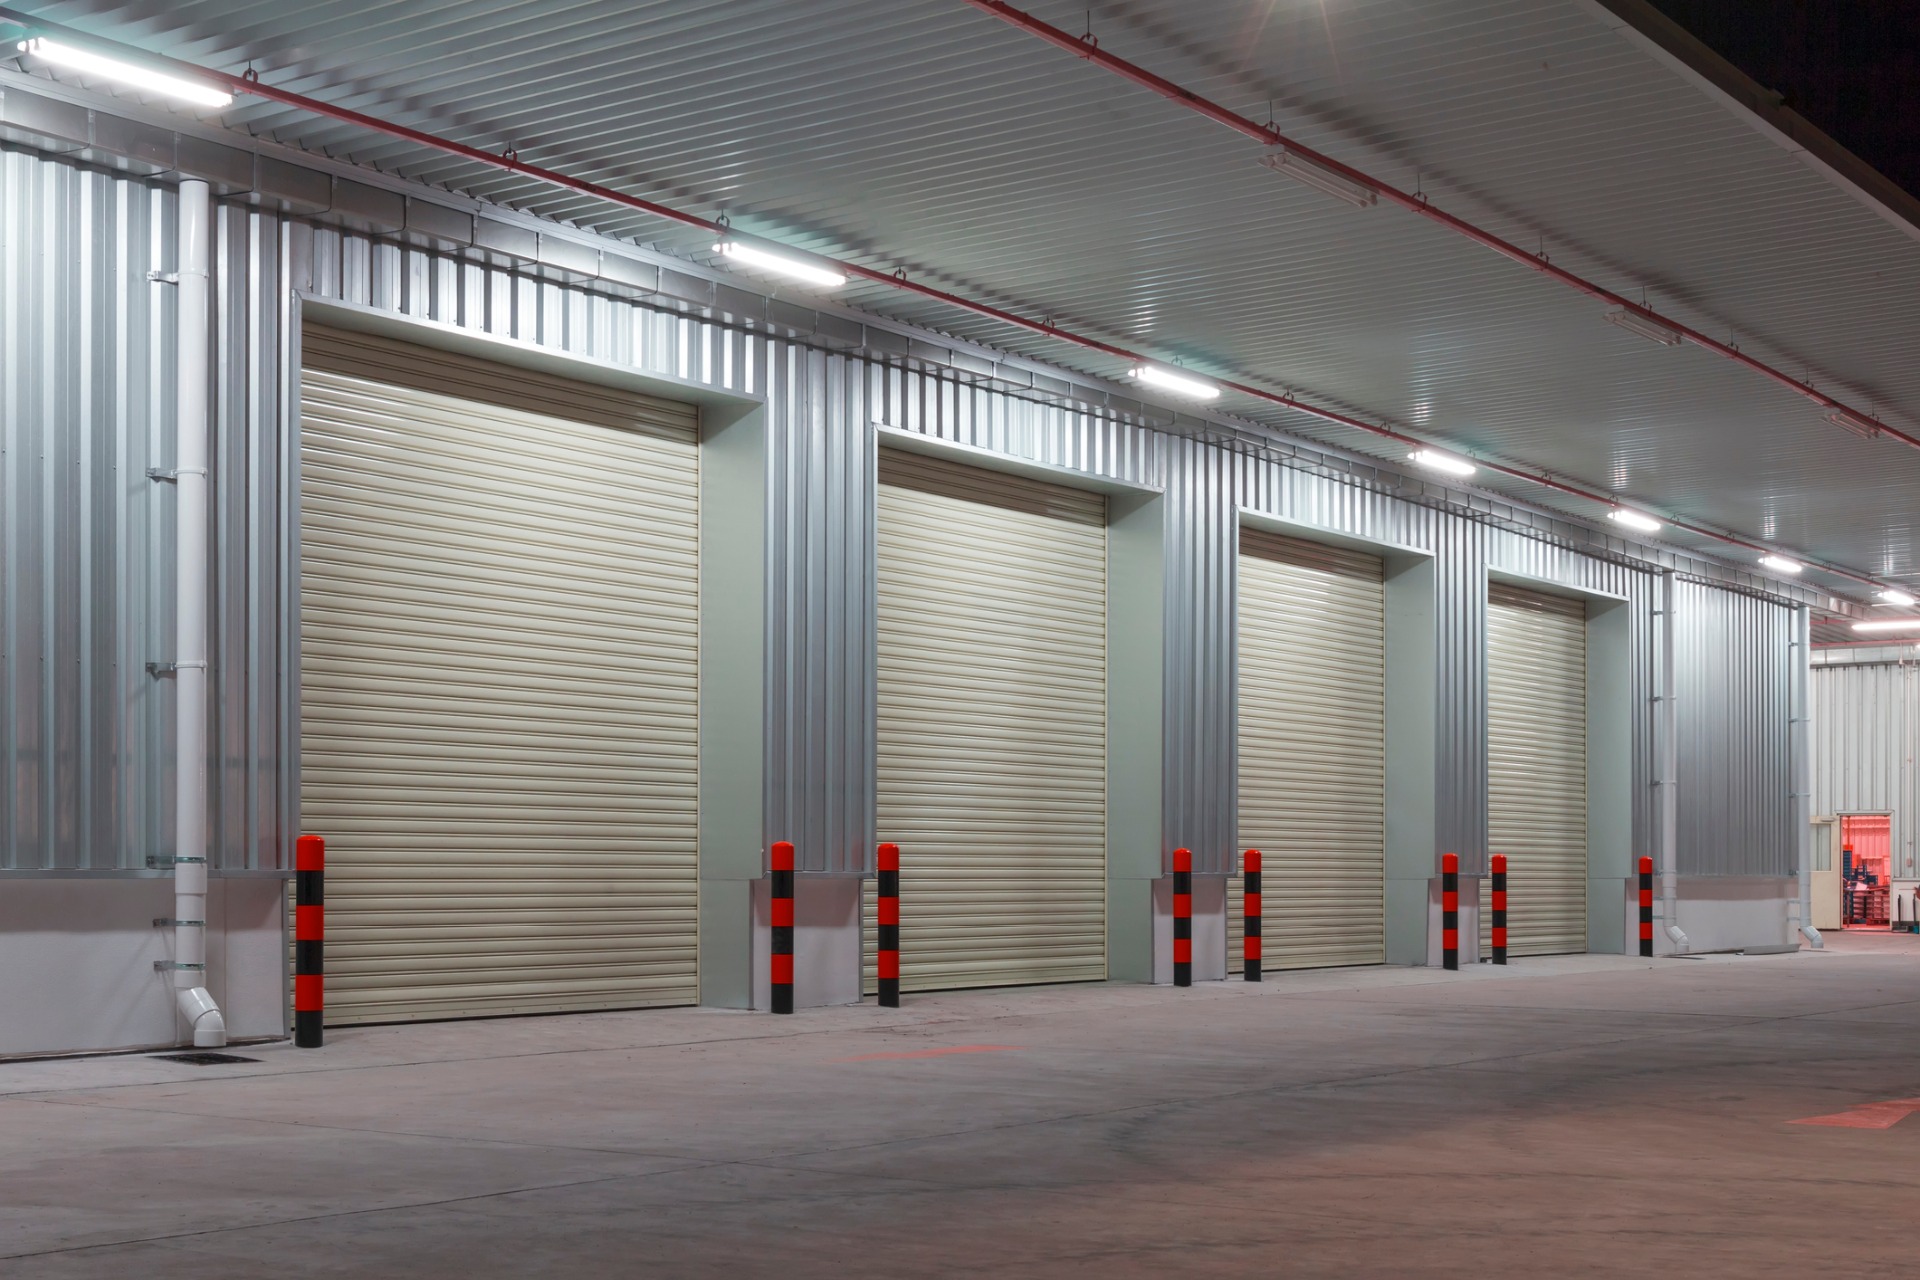 Five shutter doors, with 2 rows of 3 glass panes, installed on warehouse building